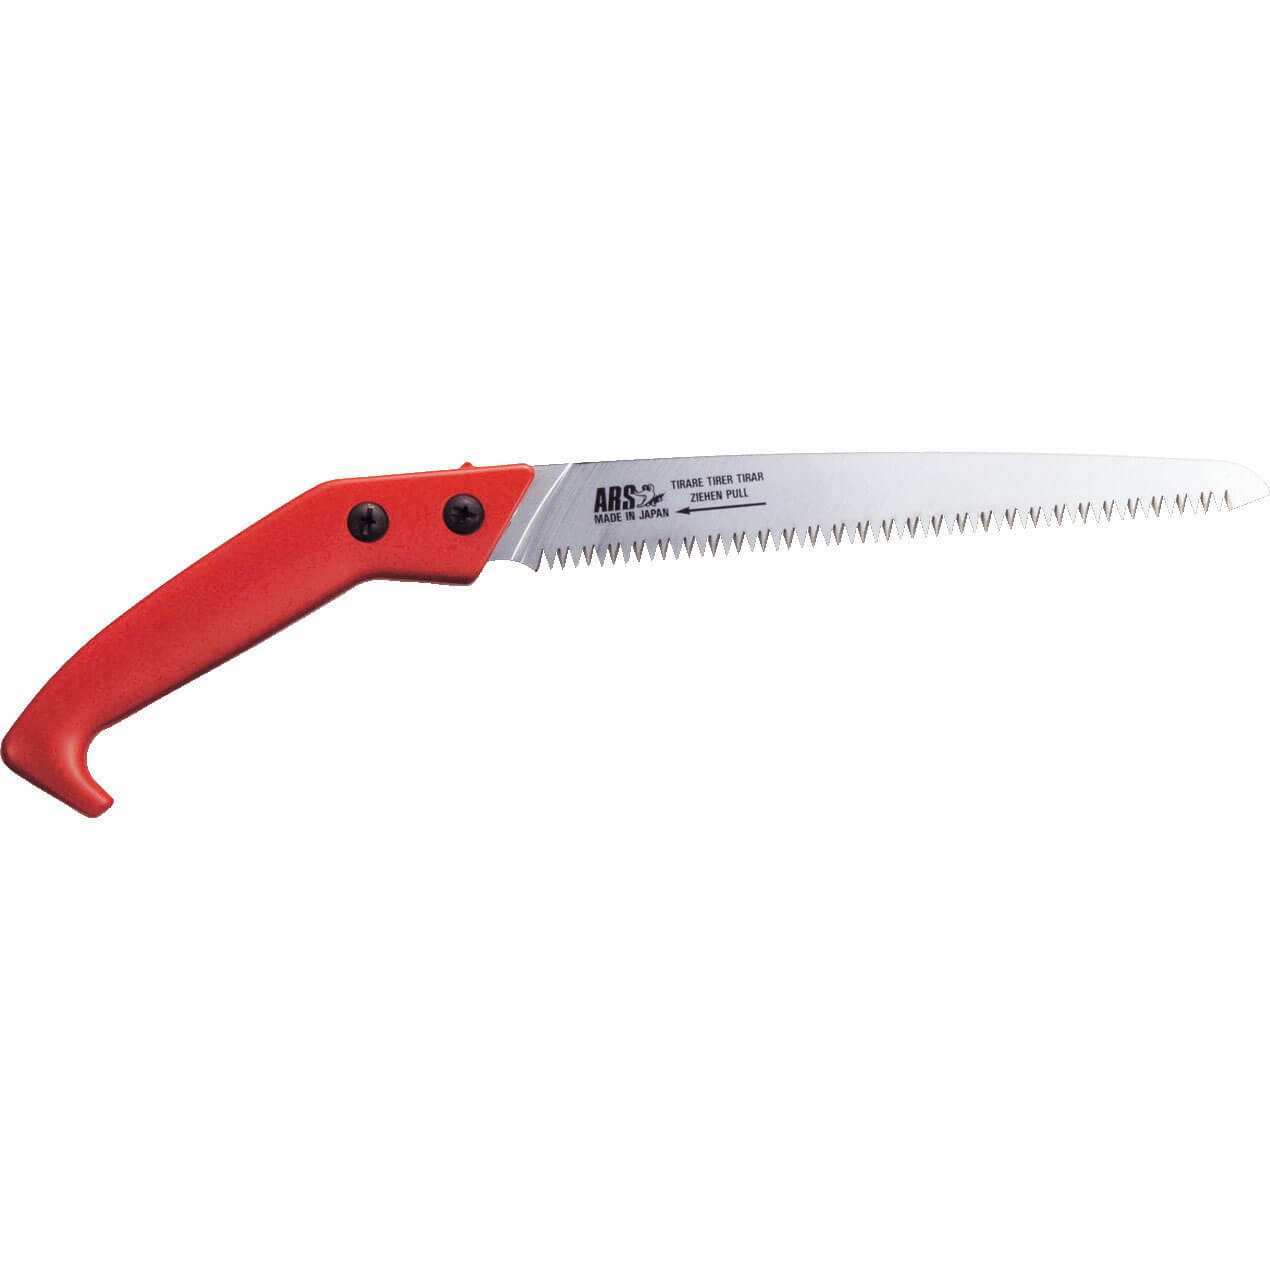 Image of ARS CAM Pruning Saw 432mm